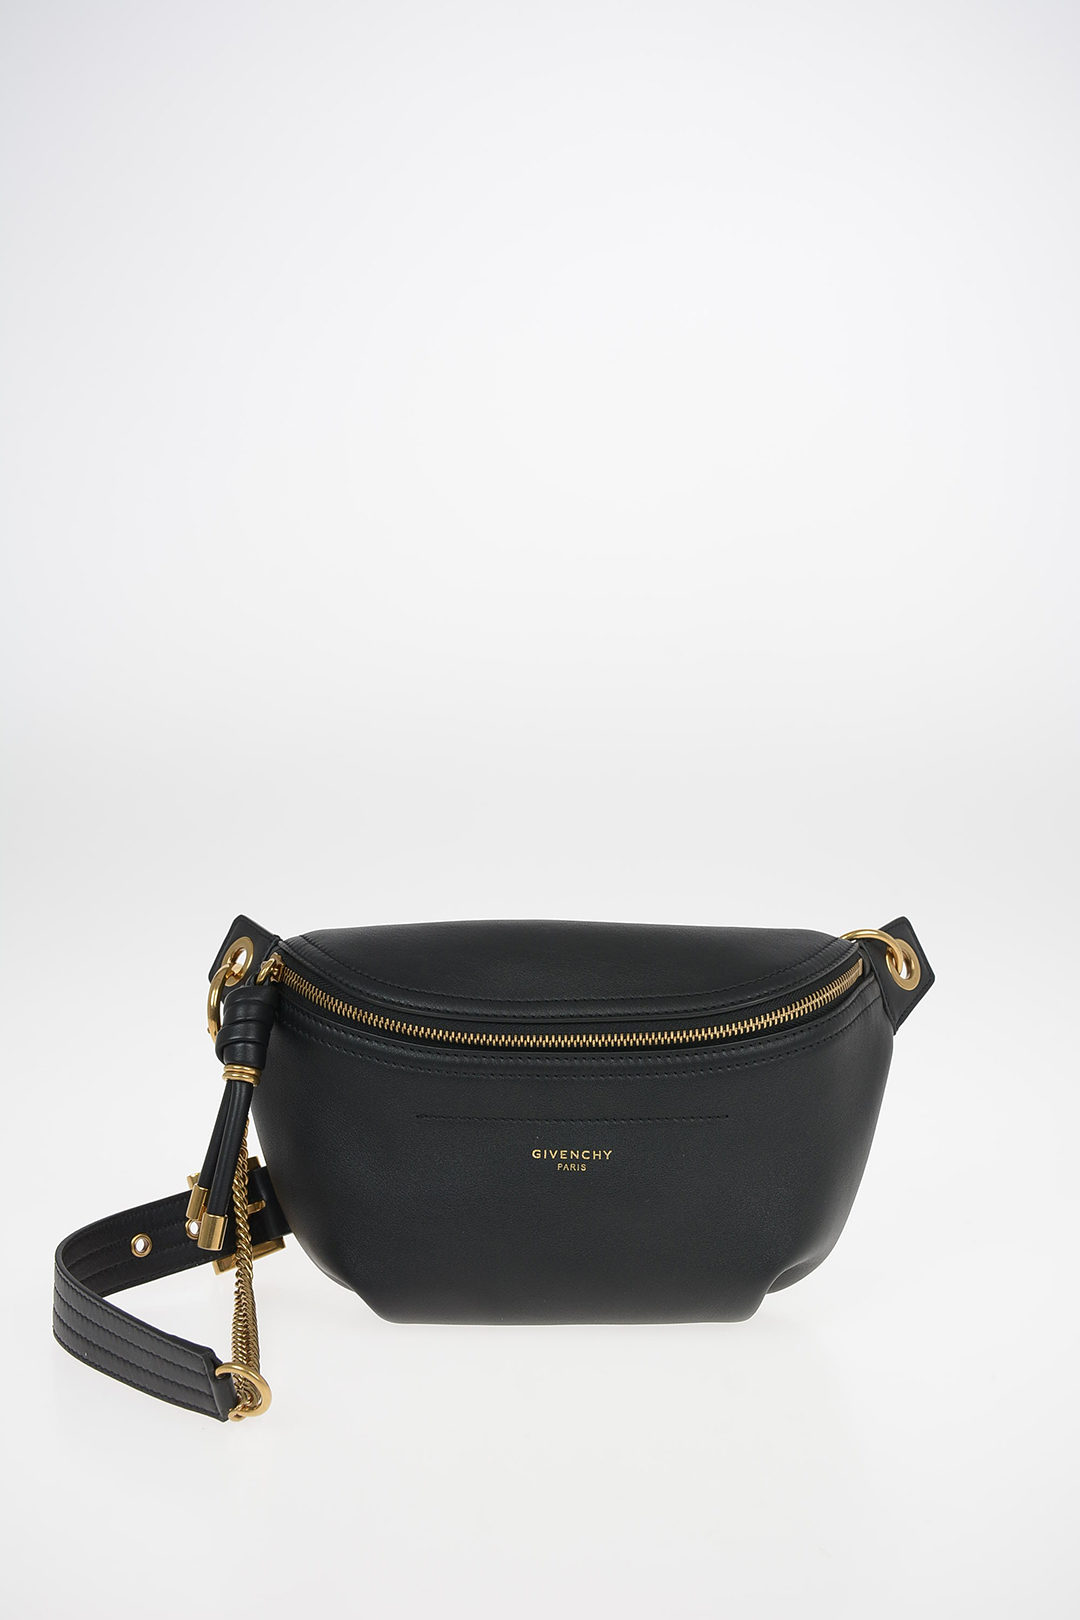 Givenchy Leather WHIP Bum Bag with 